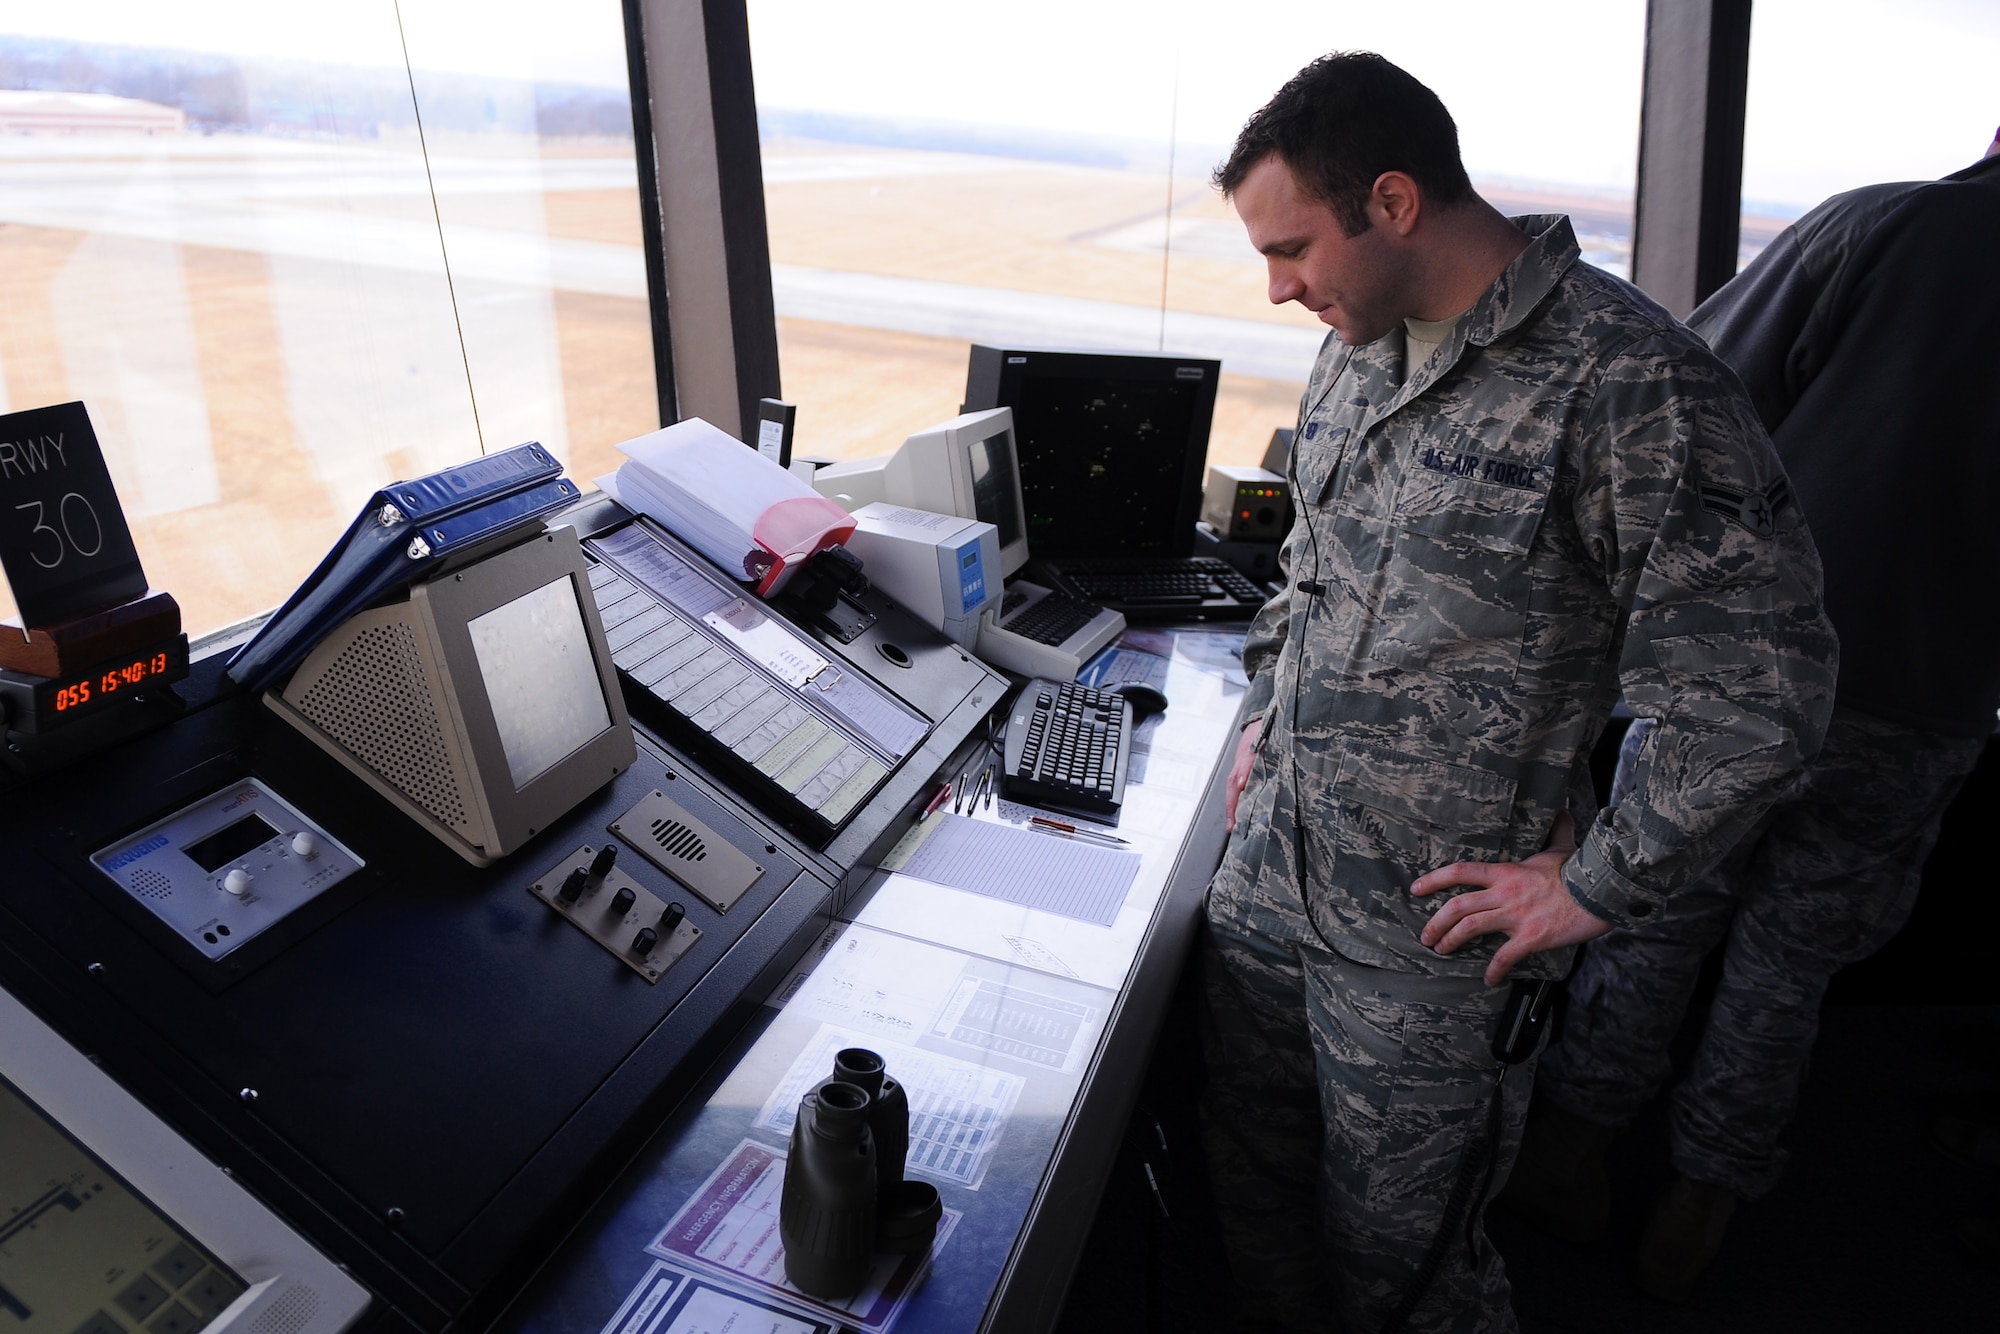 OFFUTT AIR FORCE BASE, Neb. - Airman 1st Class Mike Bier, an air traffic controller apprentice assigned to the 55th Operations Support Squadron, monitors aircraft traffic in and around Offutt, Feb. 24. U.S. Air Force Photo by Josh Plueger (Released)
